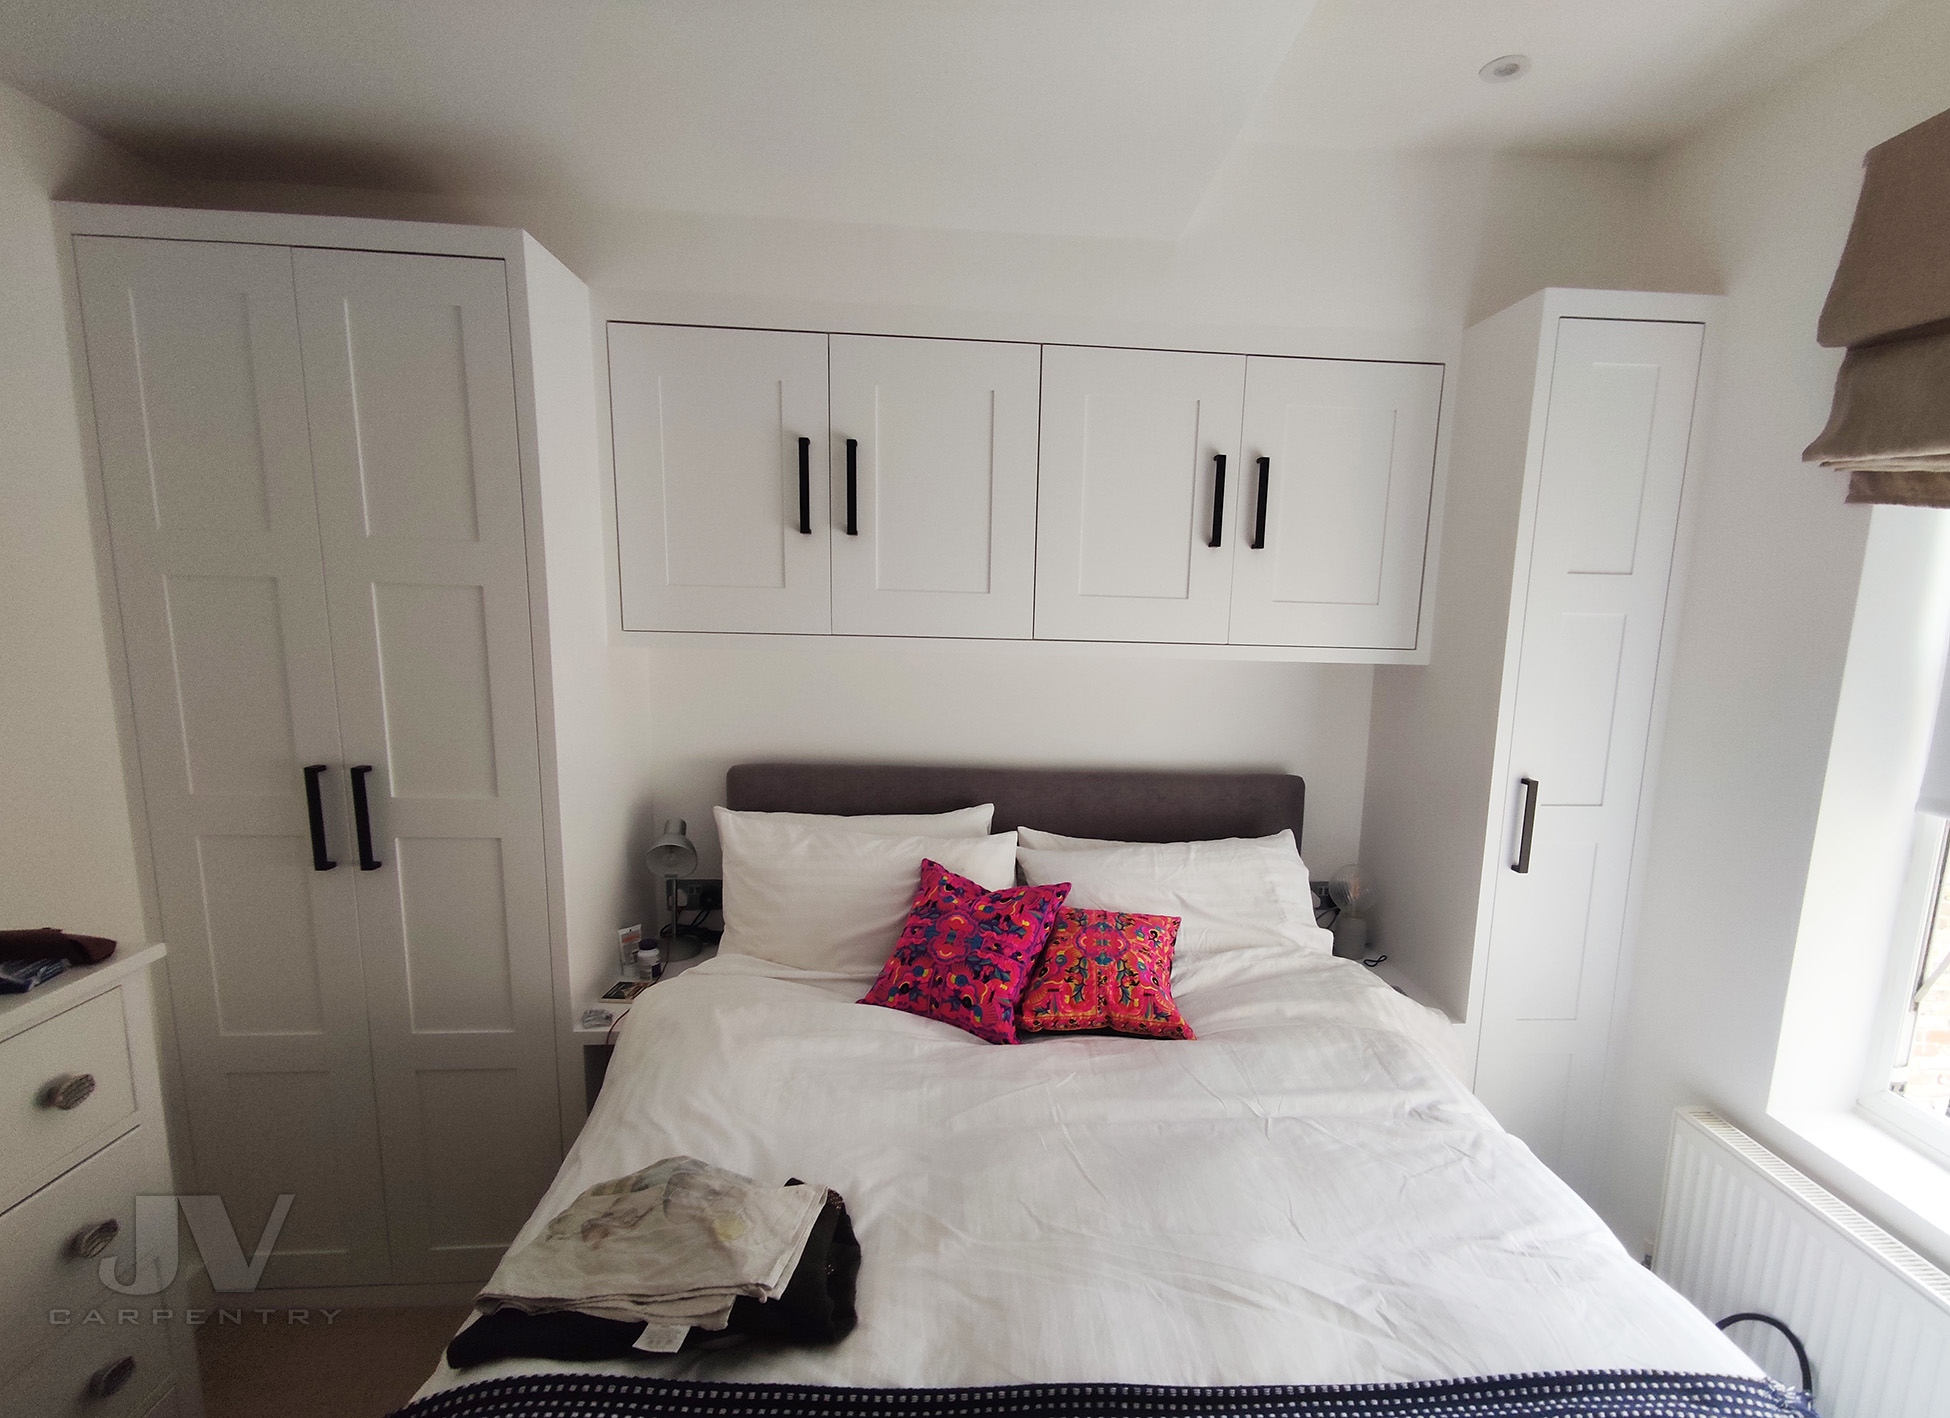 14 Fitted Wardrobe Ideas for a small bedroom | JV Carpentry